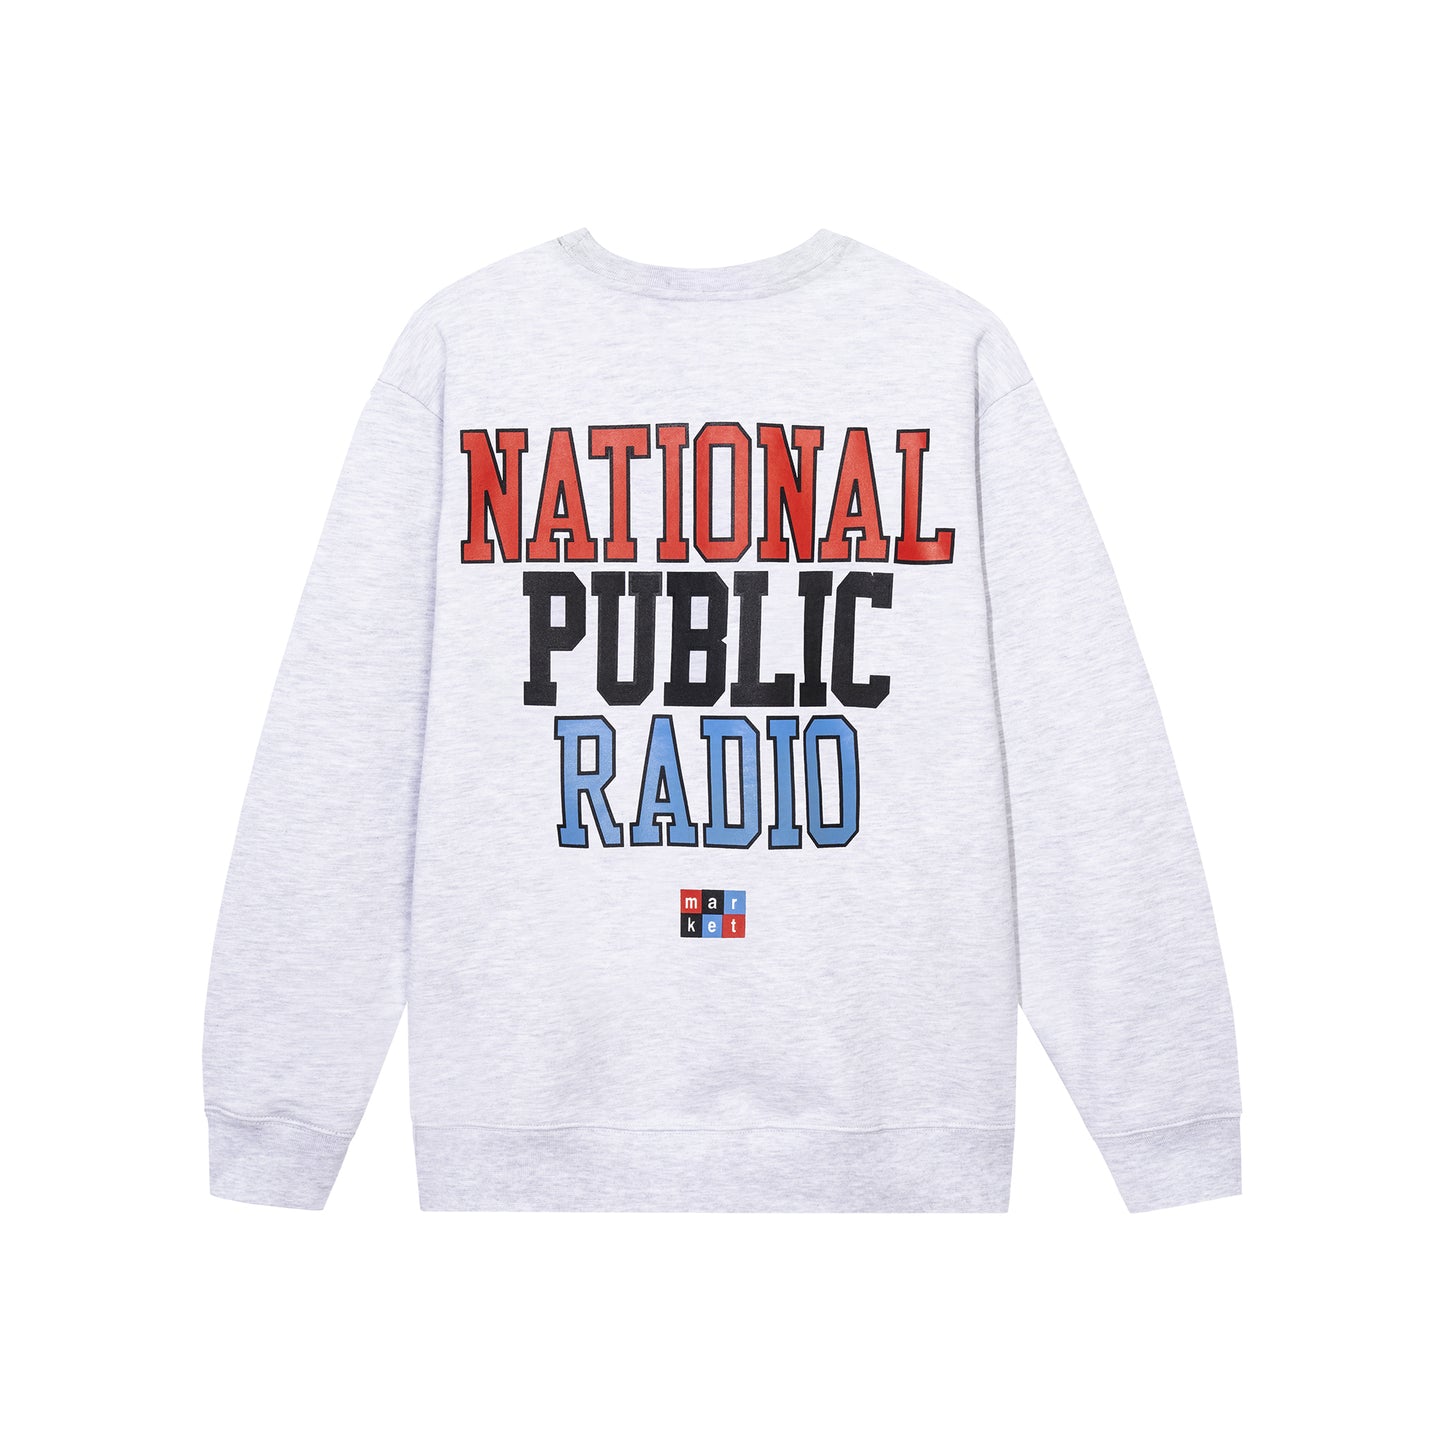 MARKET clothing brand NPR FACTS CREWNECK SWEATSHIRT. Find more graphic tees and hoodies at MarketStudios.com. Formally Chinatown Market.